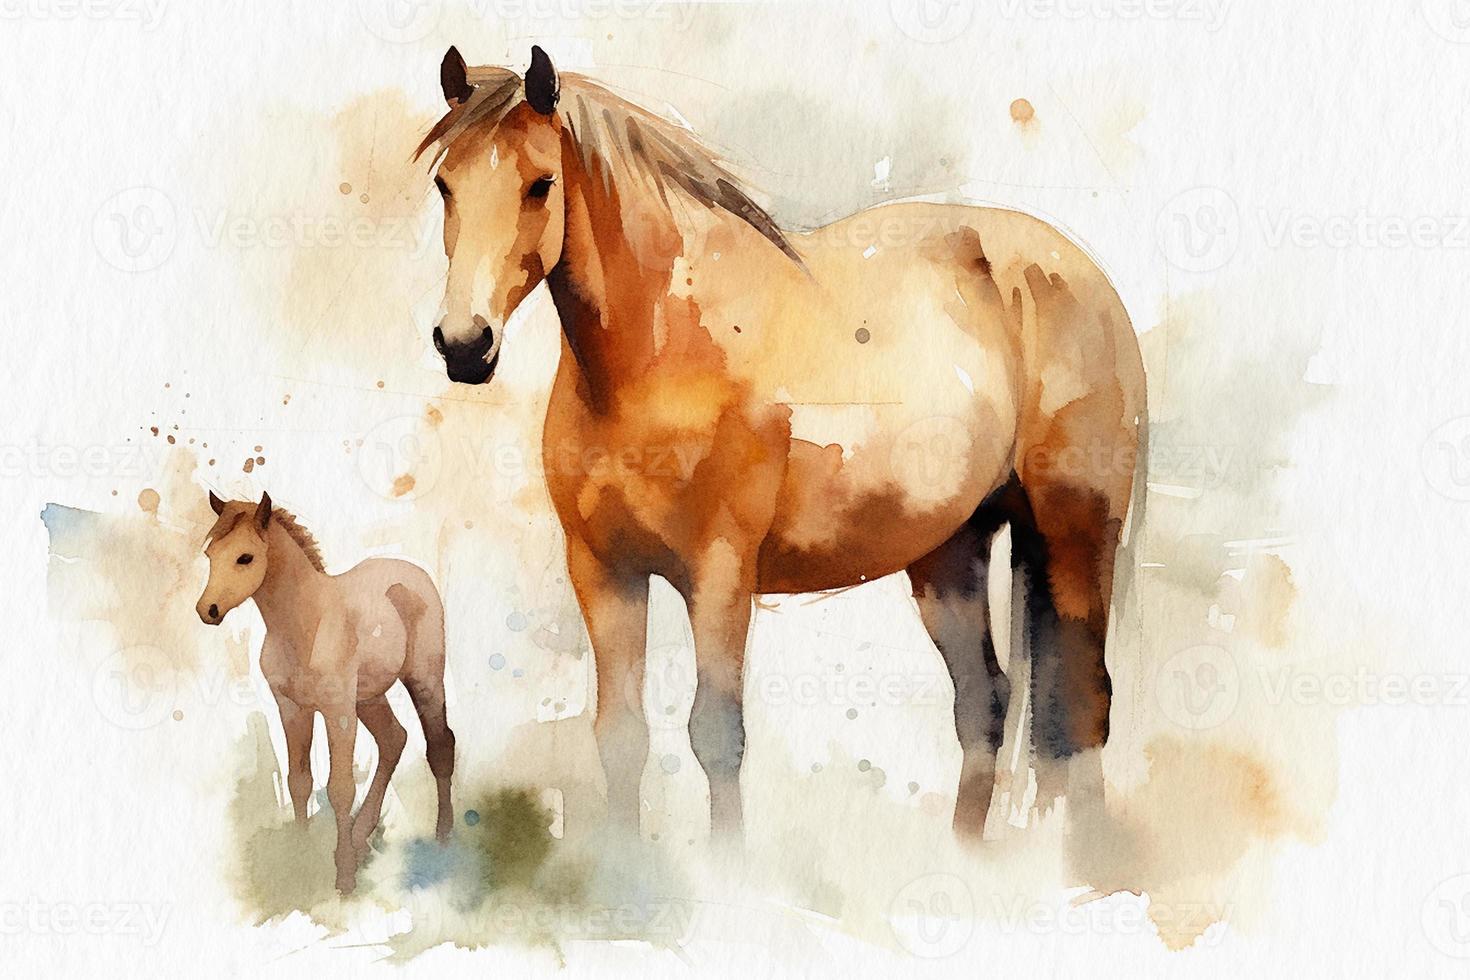 Brown horse and foal in a pasture, watercolor painting on textured paper. Digital watercolor painting photo